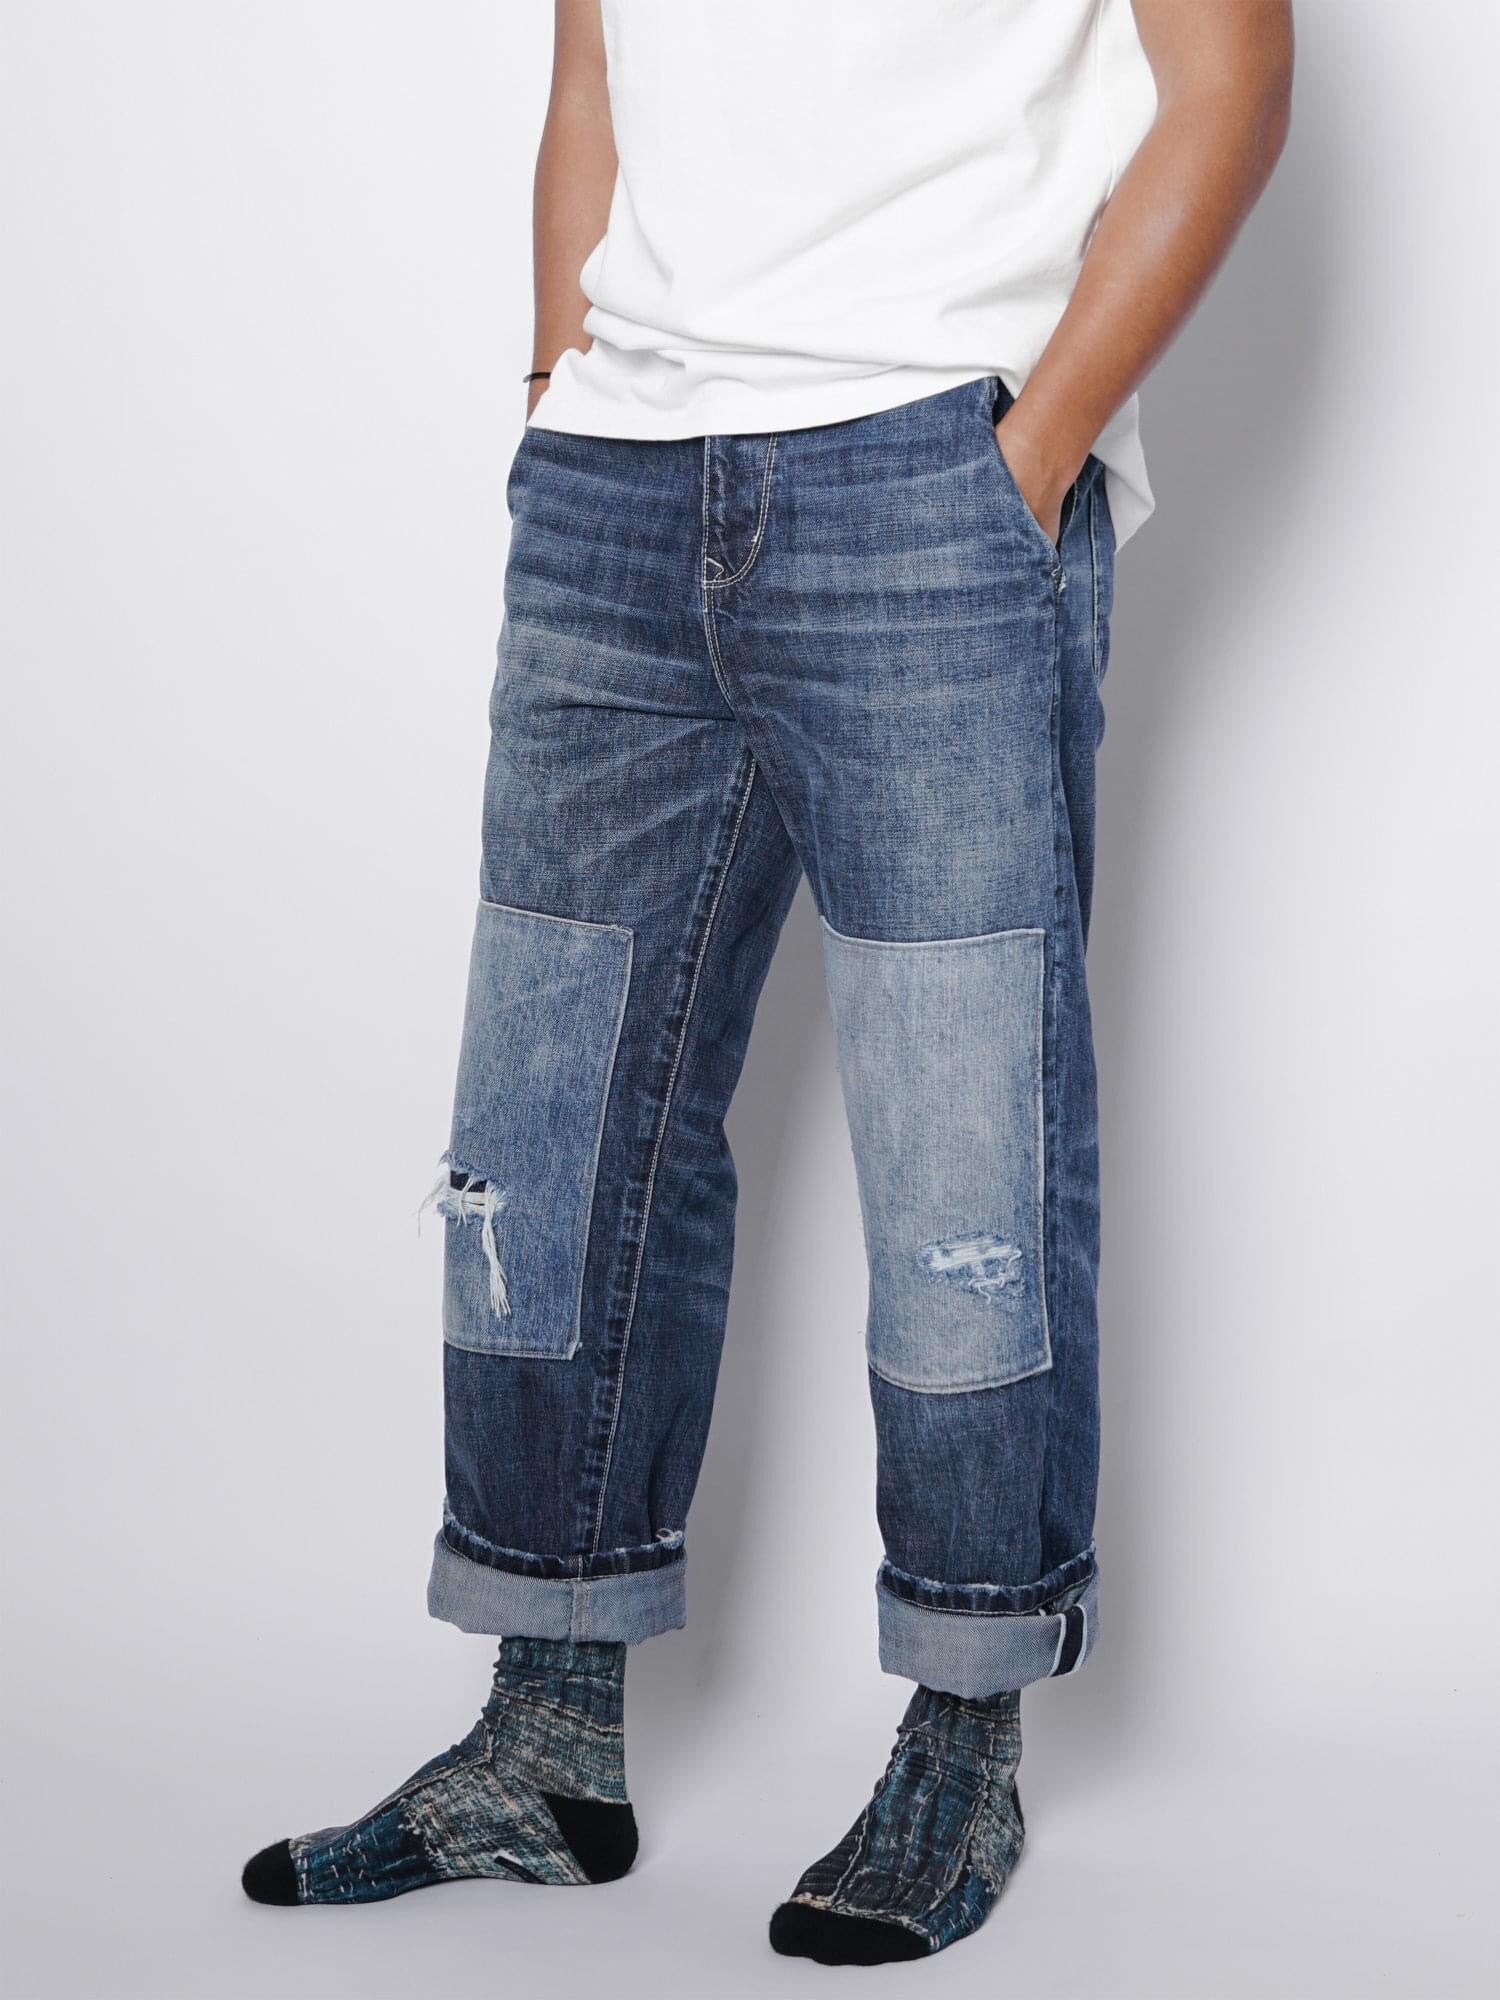 FH02 Damaged Washed Jeans Series【Type A】 – Full House 